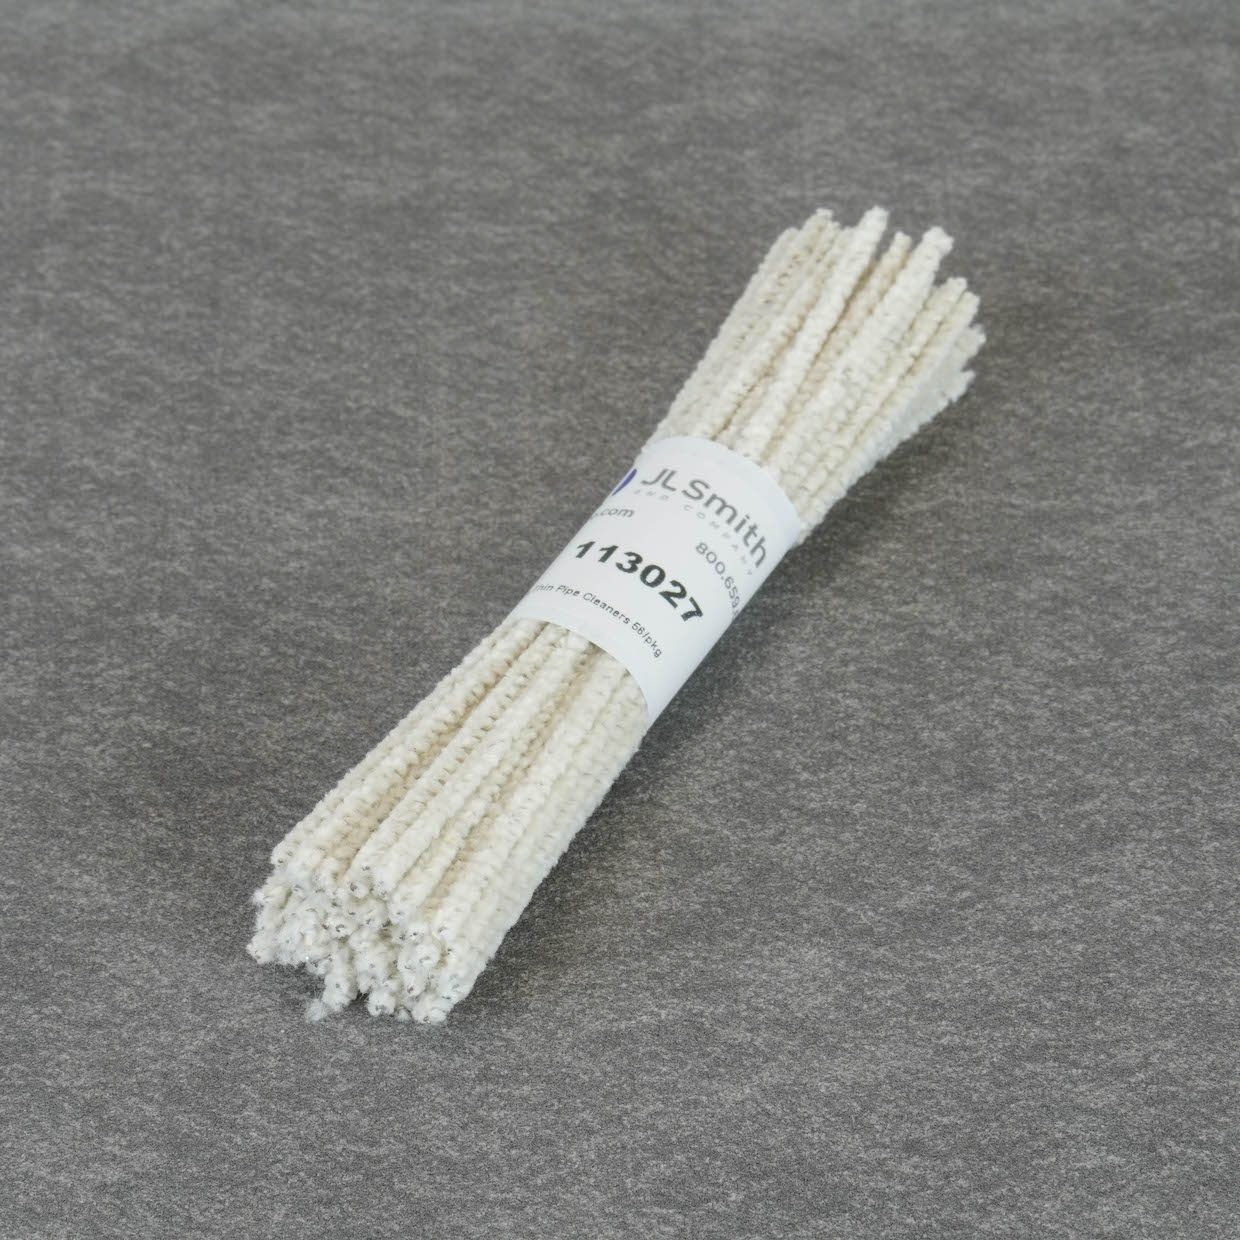 White Extra Stiff Pipe Cleaners